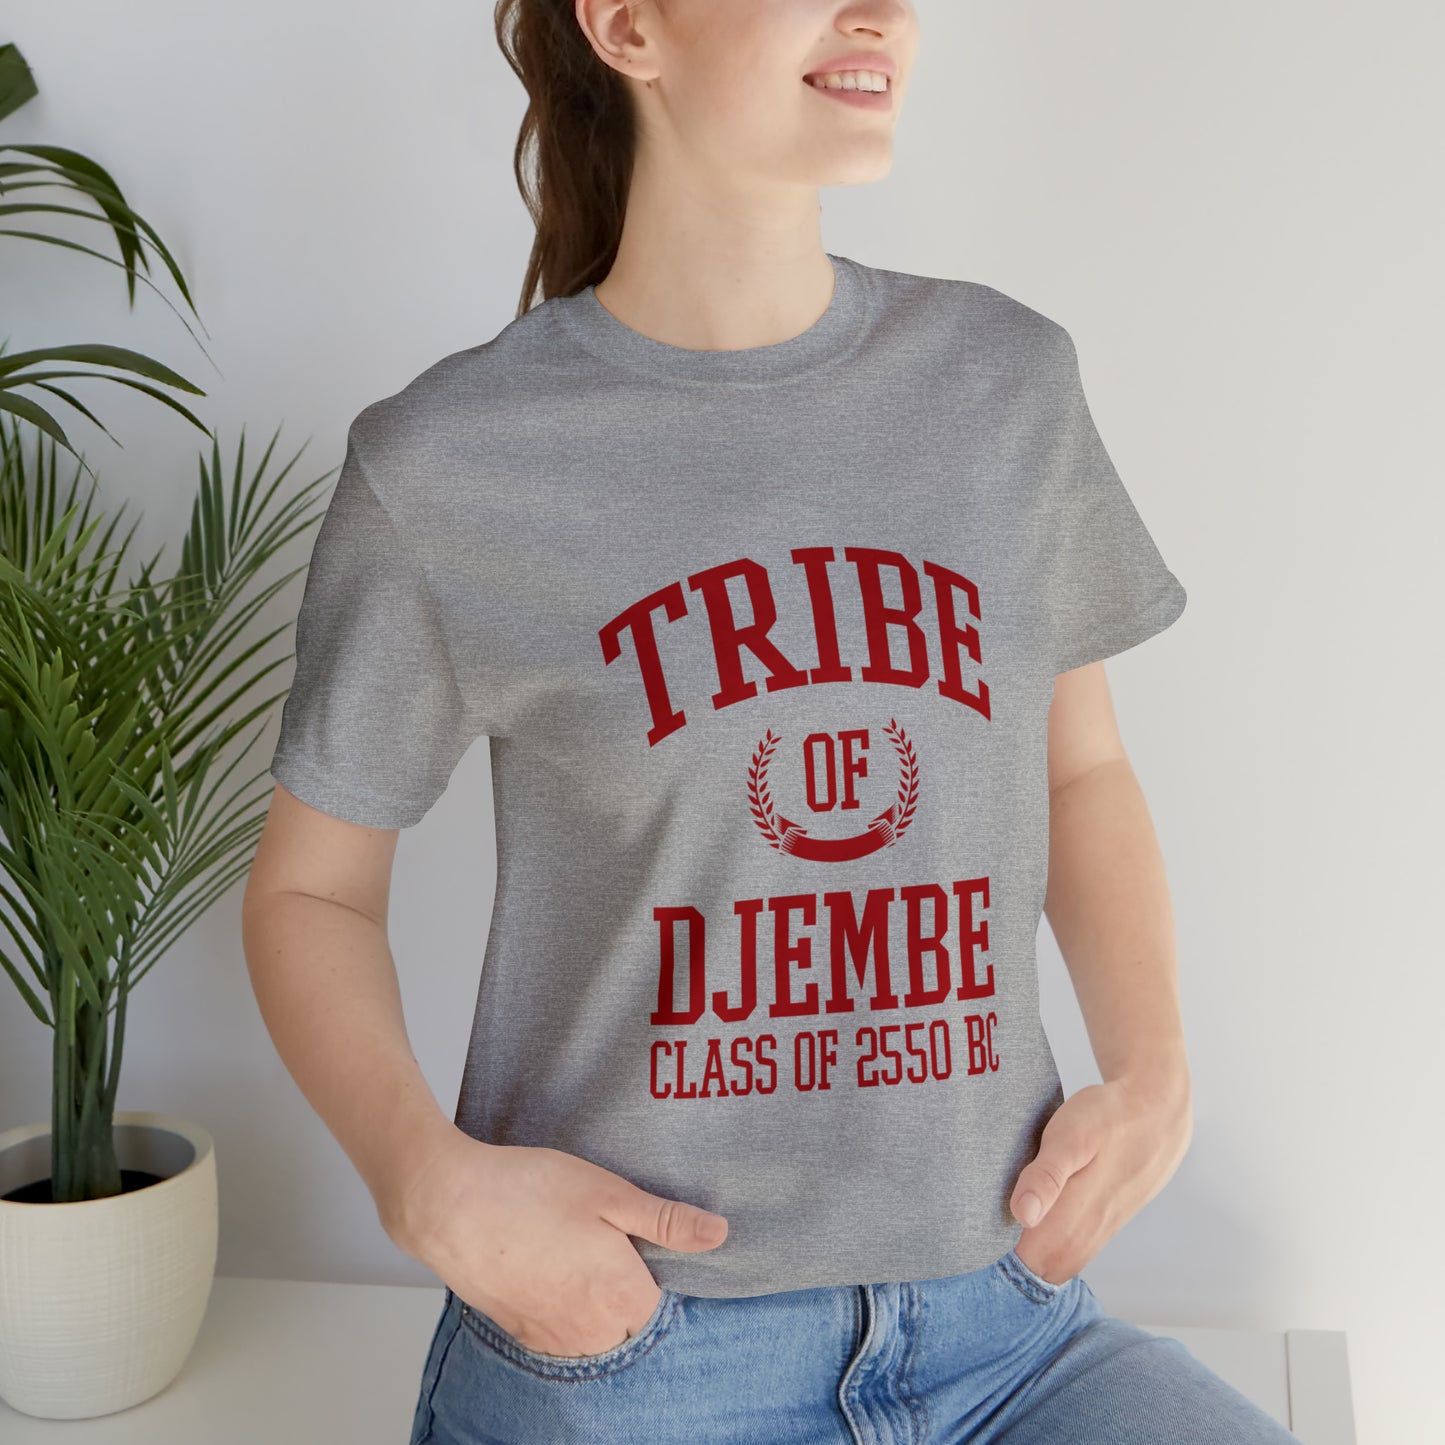 Tribe Of Djembe Class of 2550 BC Tee